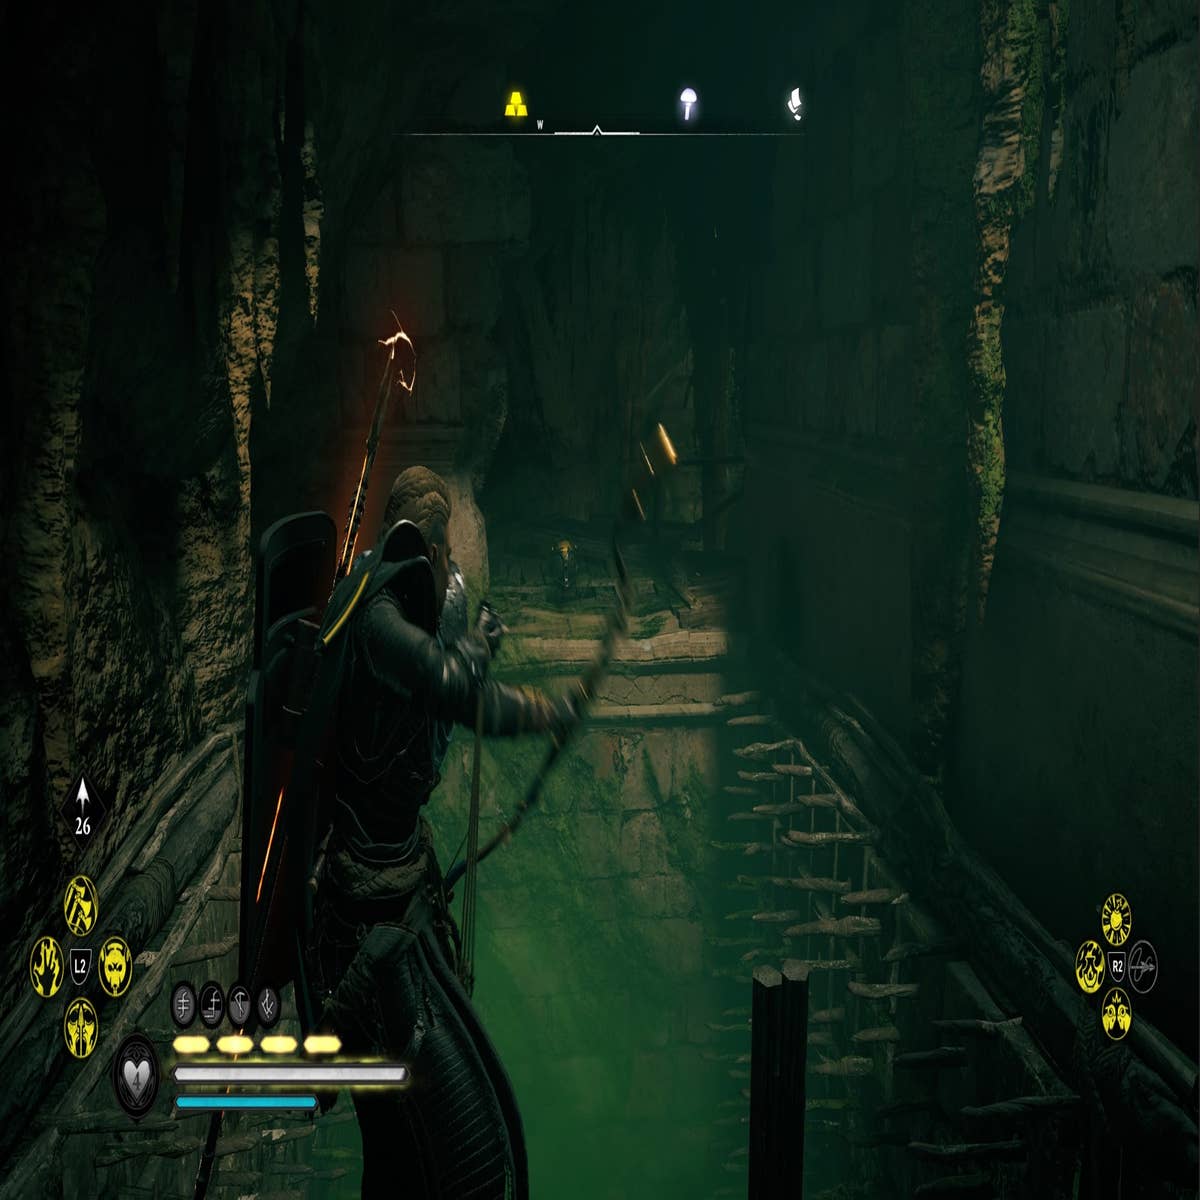 Assassin's Creed Valhalla: 9 New Images From the Gameplay Trailer